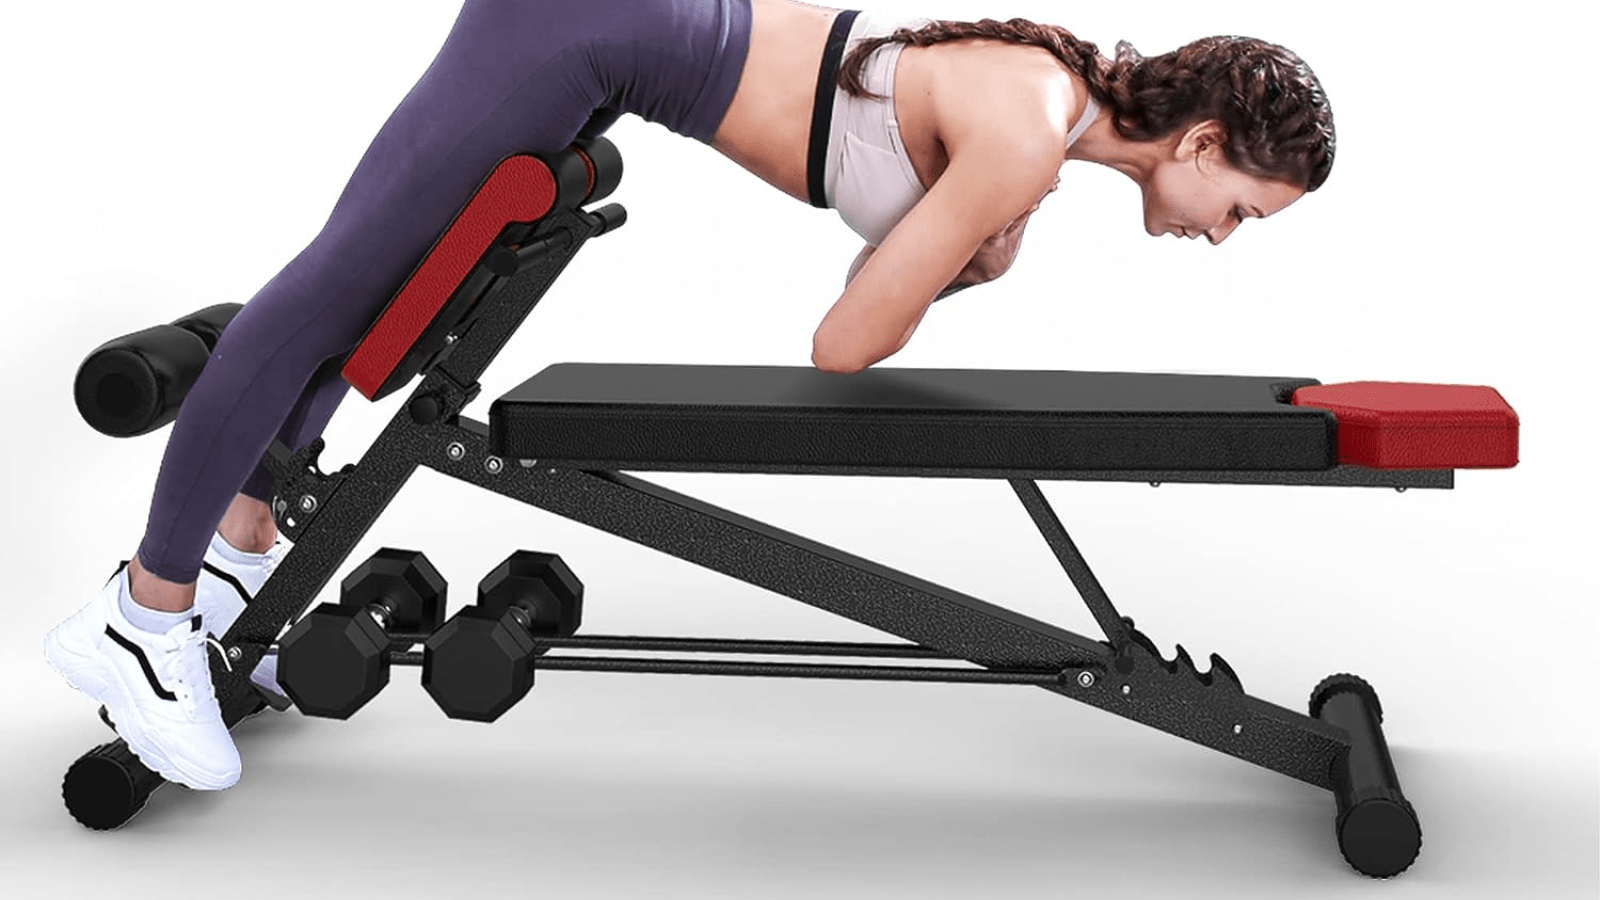 Gym Bench Review